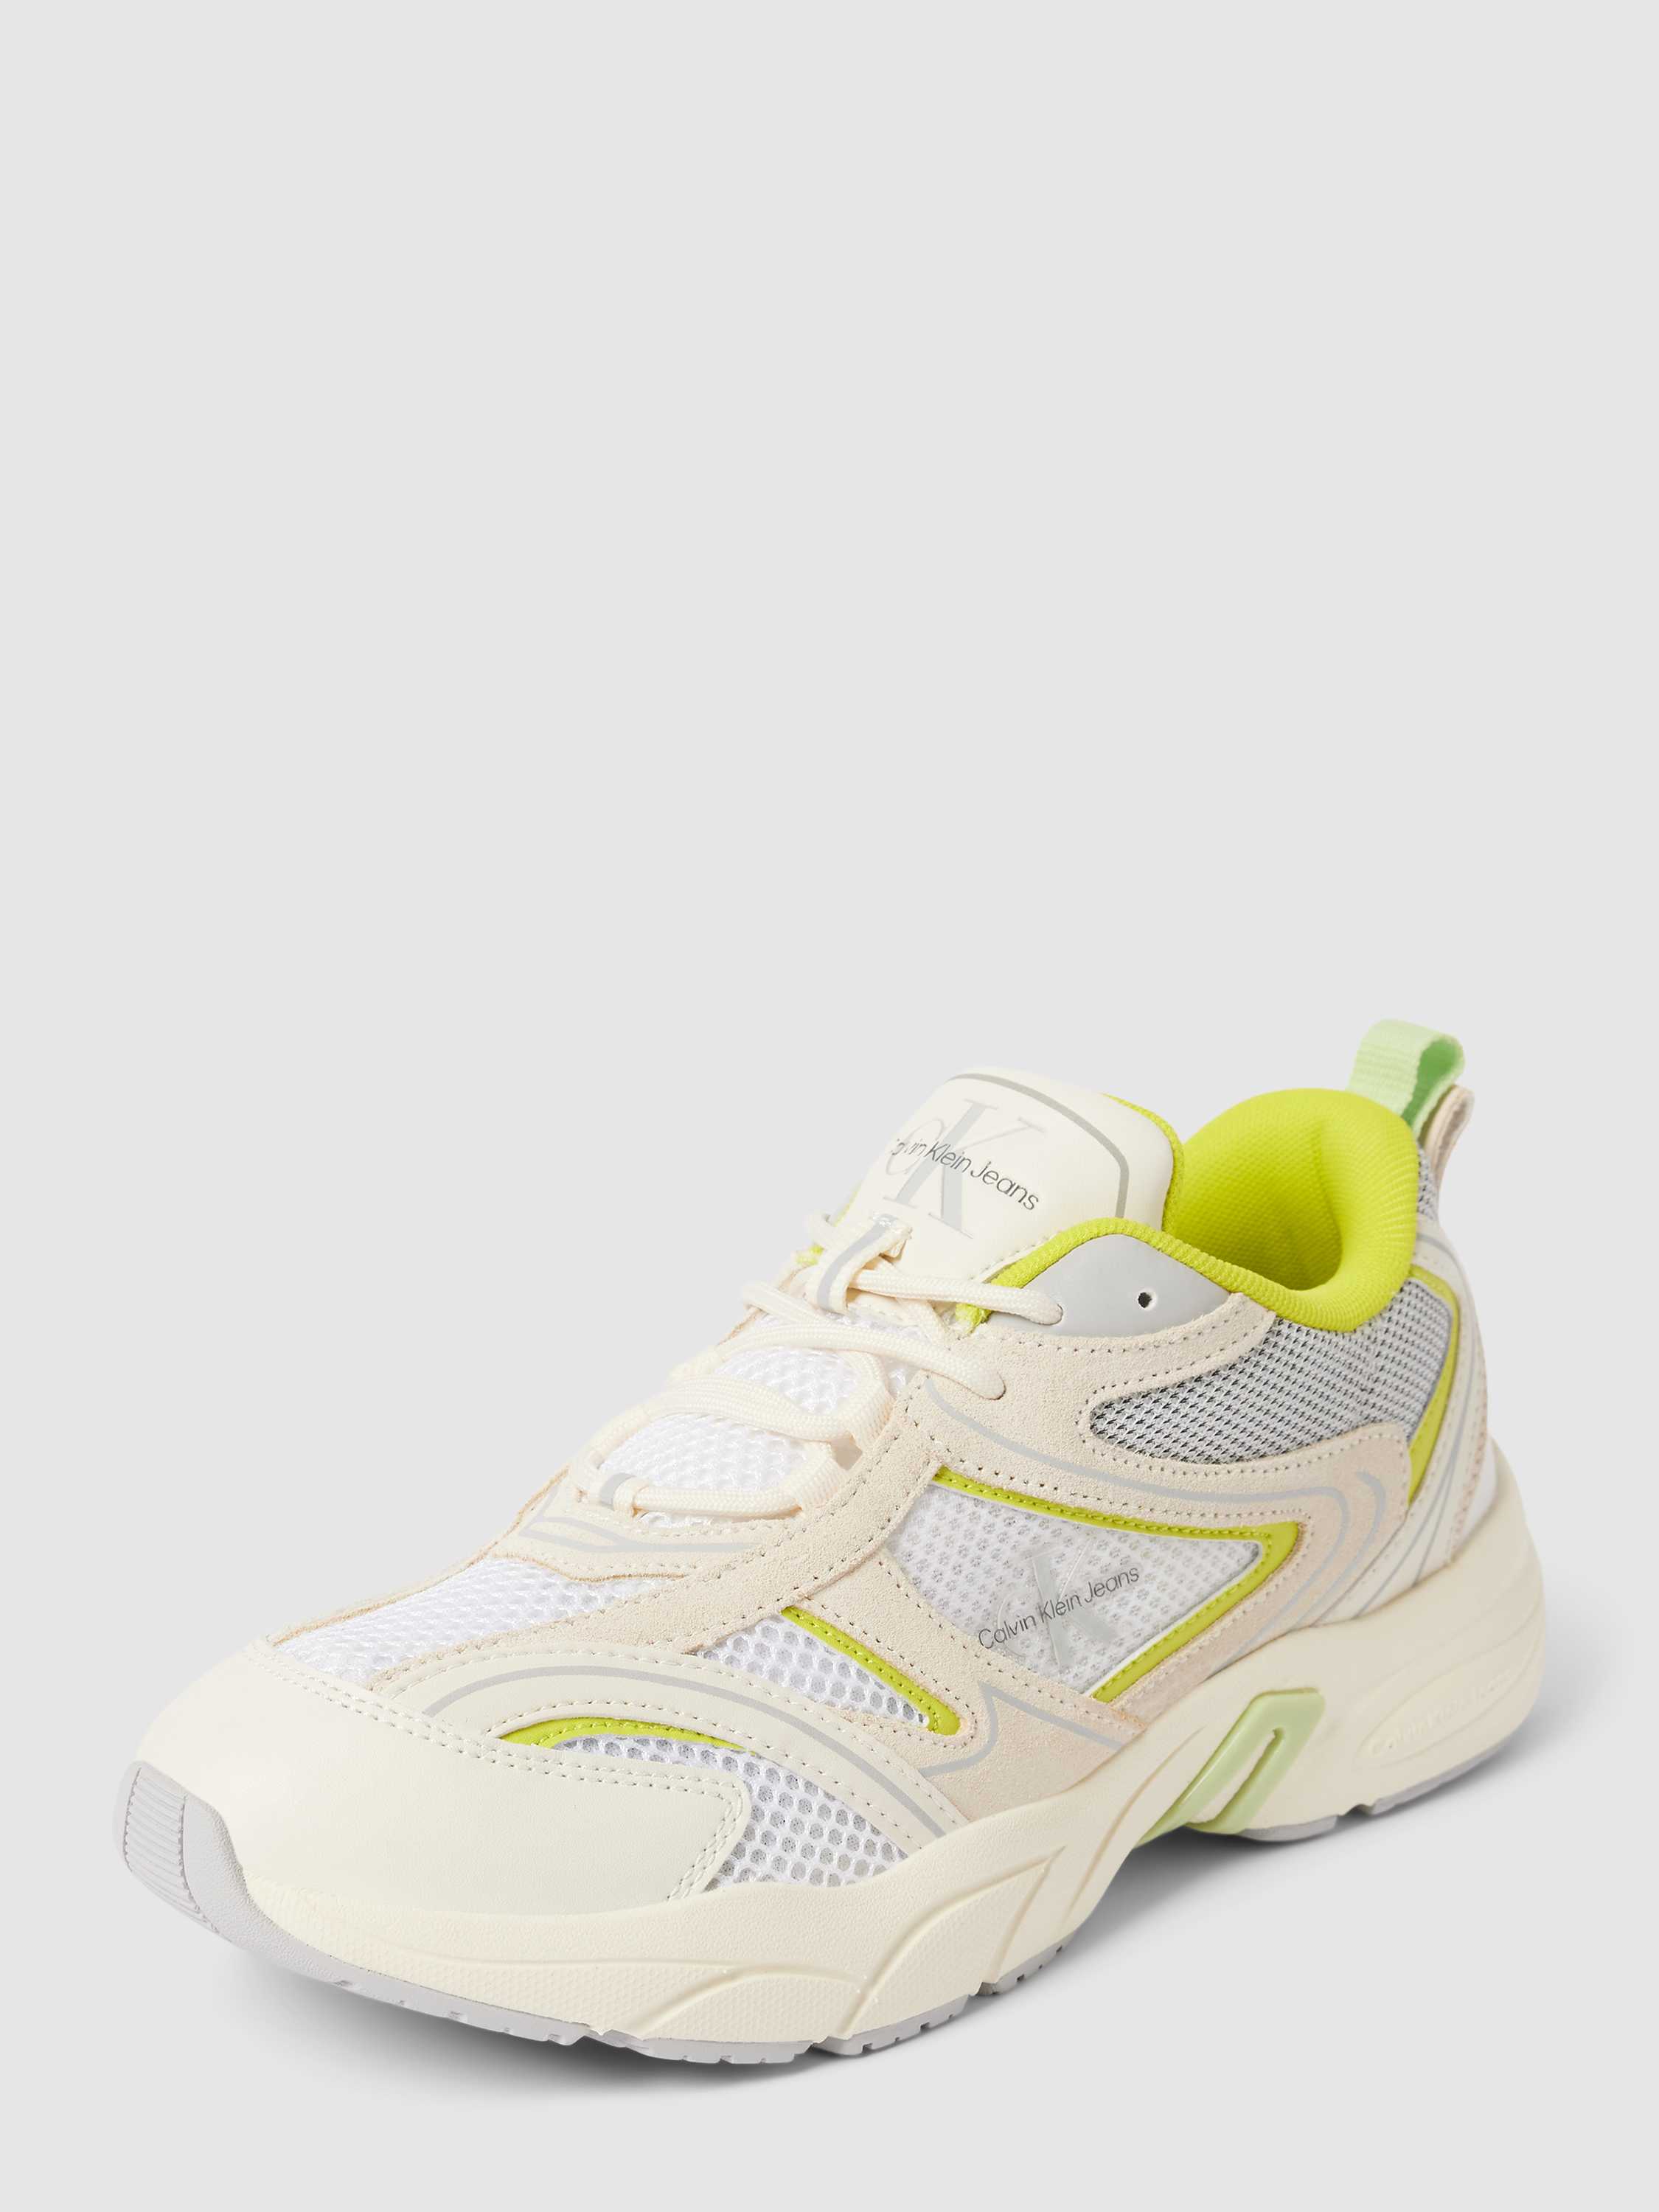 Chunky Sneaker mit Label-Details Modell 'RETRO TENNIS'